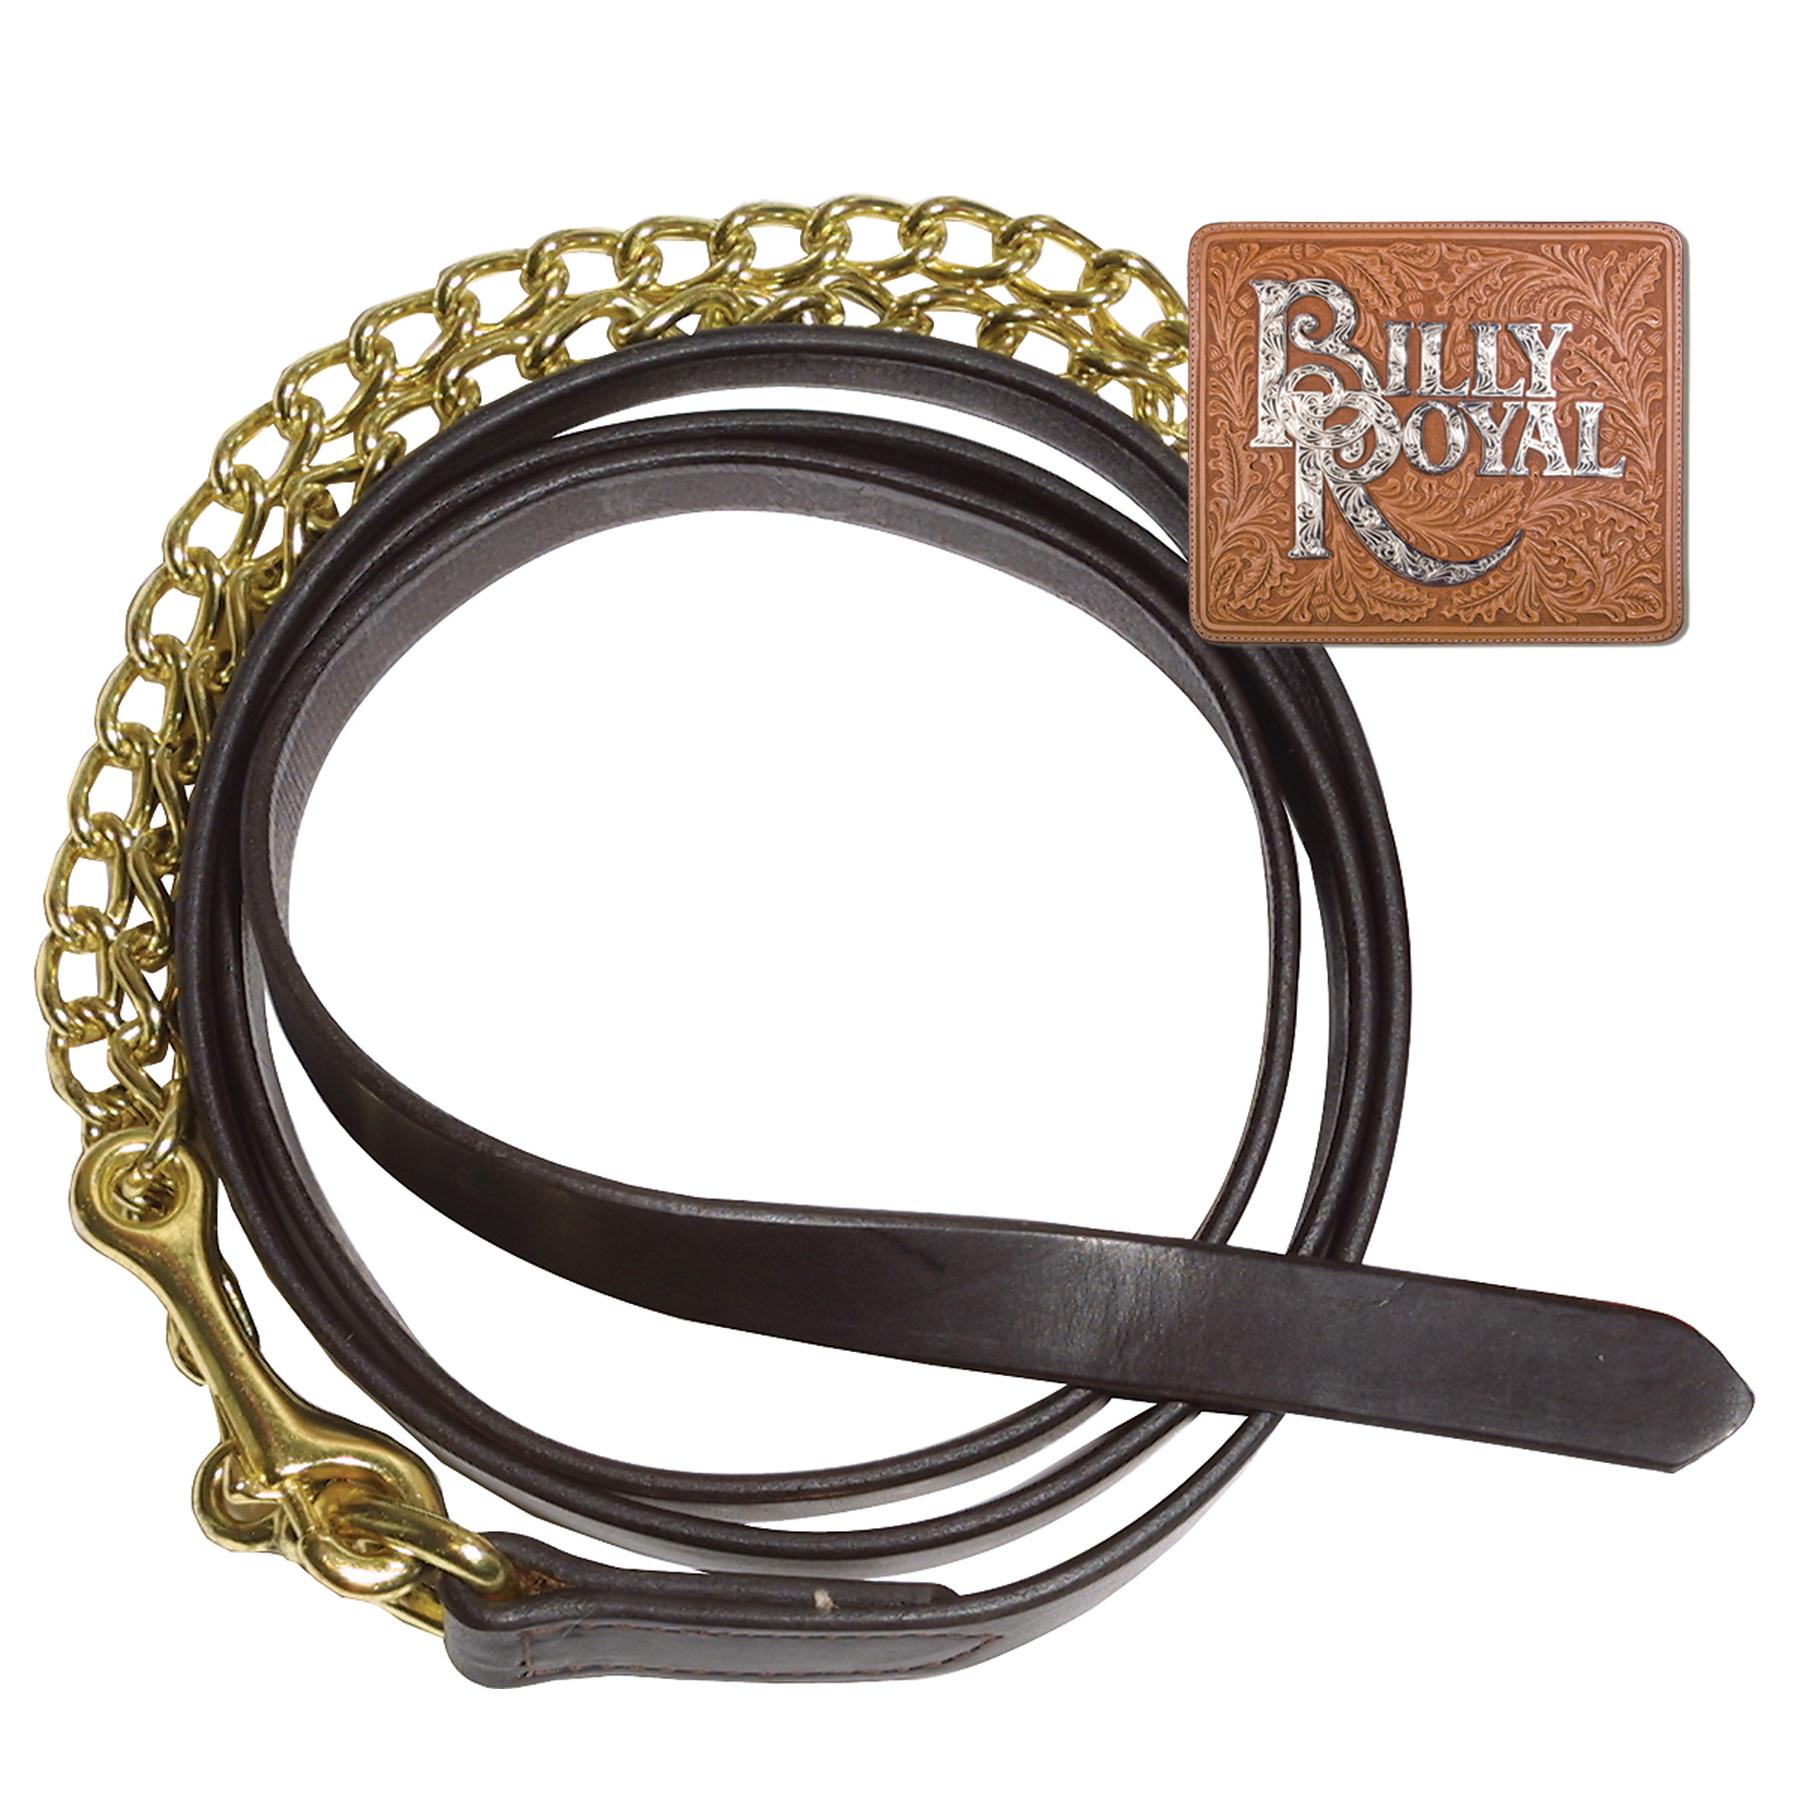 ai07480 Billy Royal® 6' Leather Lead with Brass Chain - 24